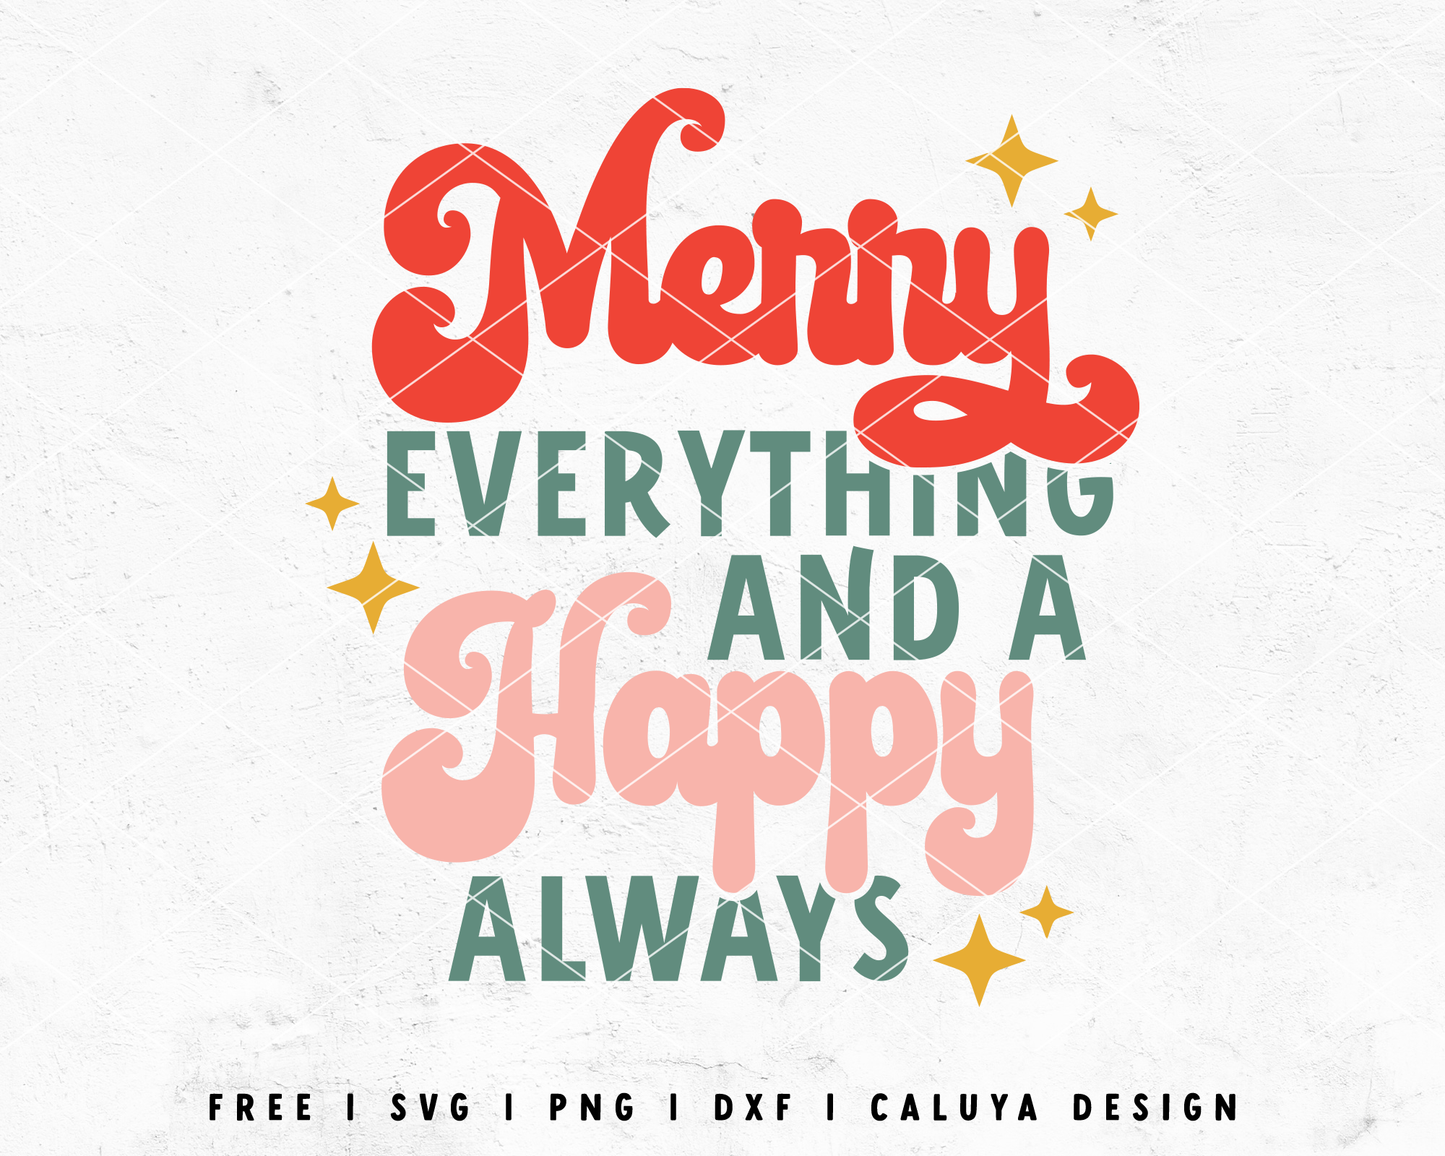 FREE Merry Everything And A Happy Always SVG | Christmas Quote SVG Cut File for Cricut, Cameo Silhouette 